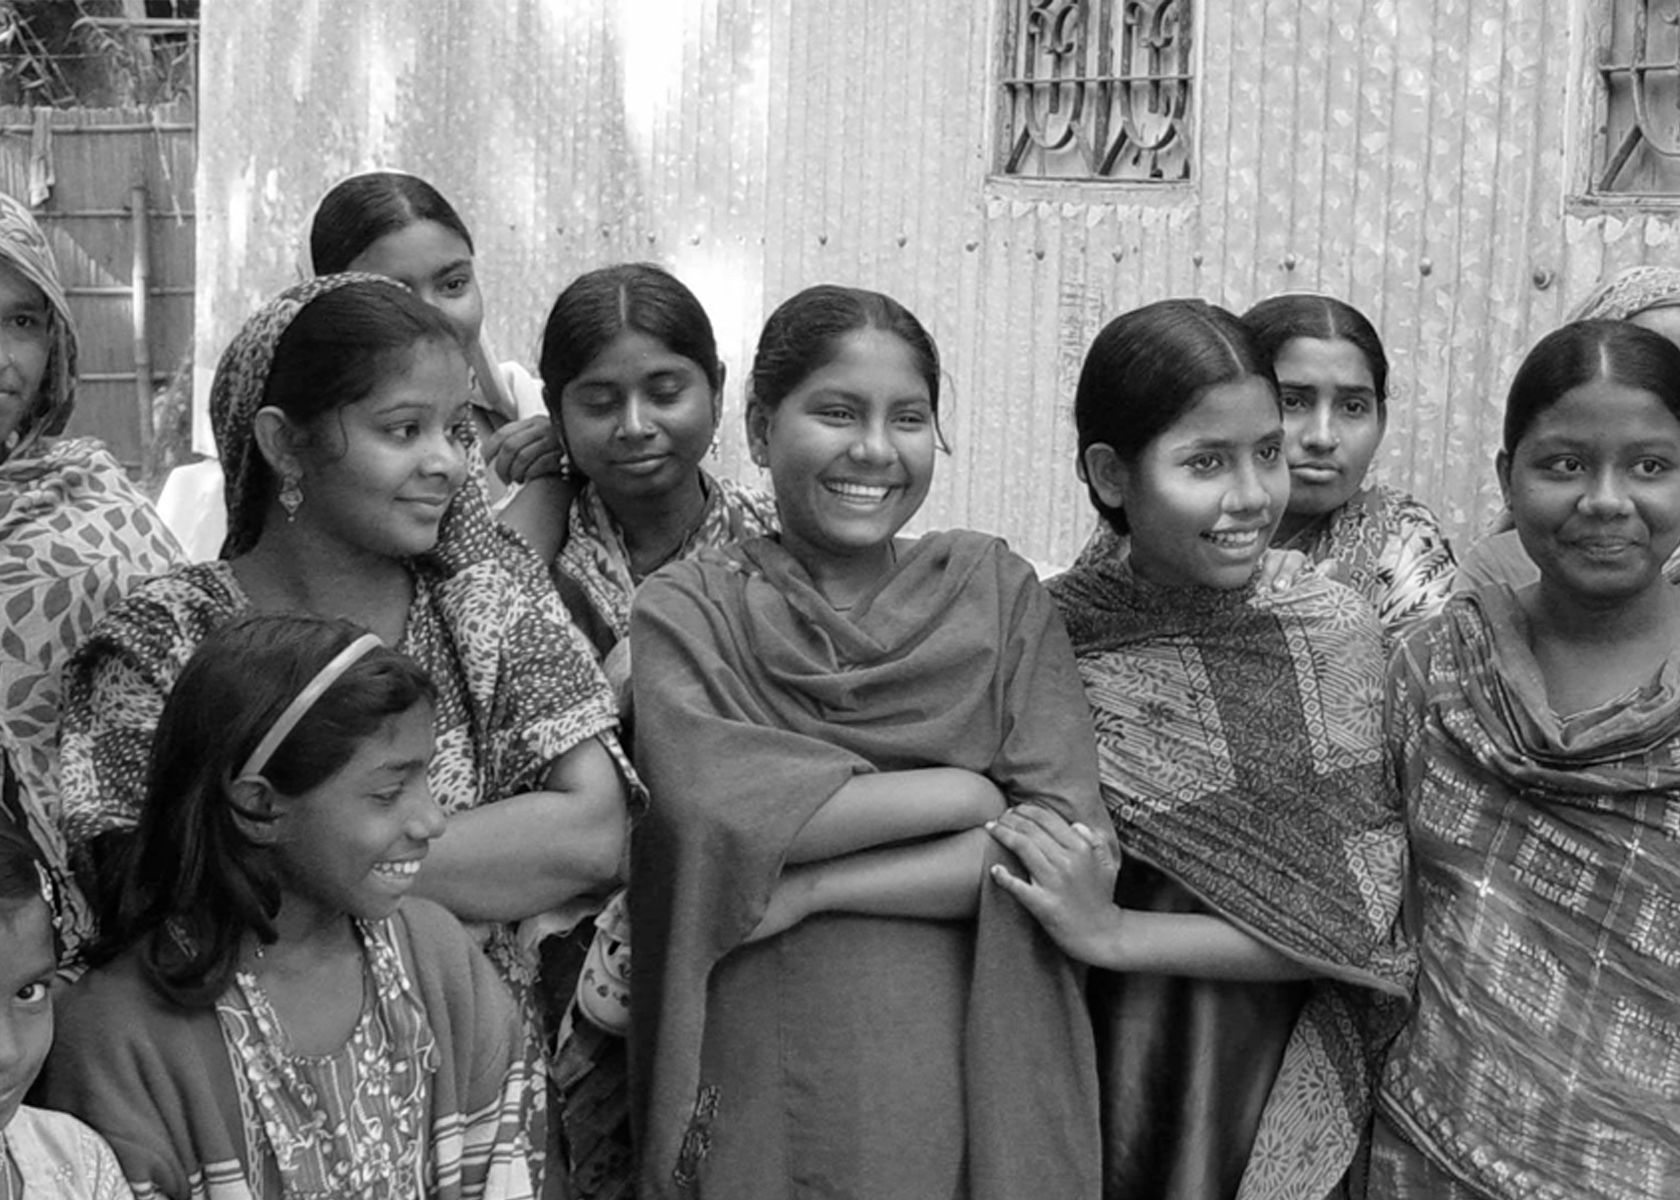 A black and white image of nine girls wearing saris, standing close together and looking off camera